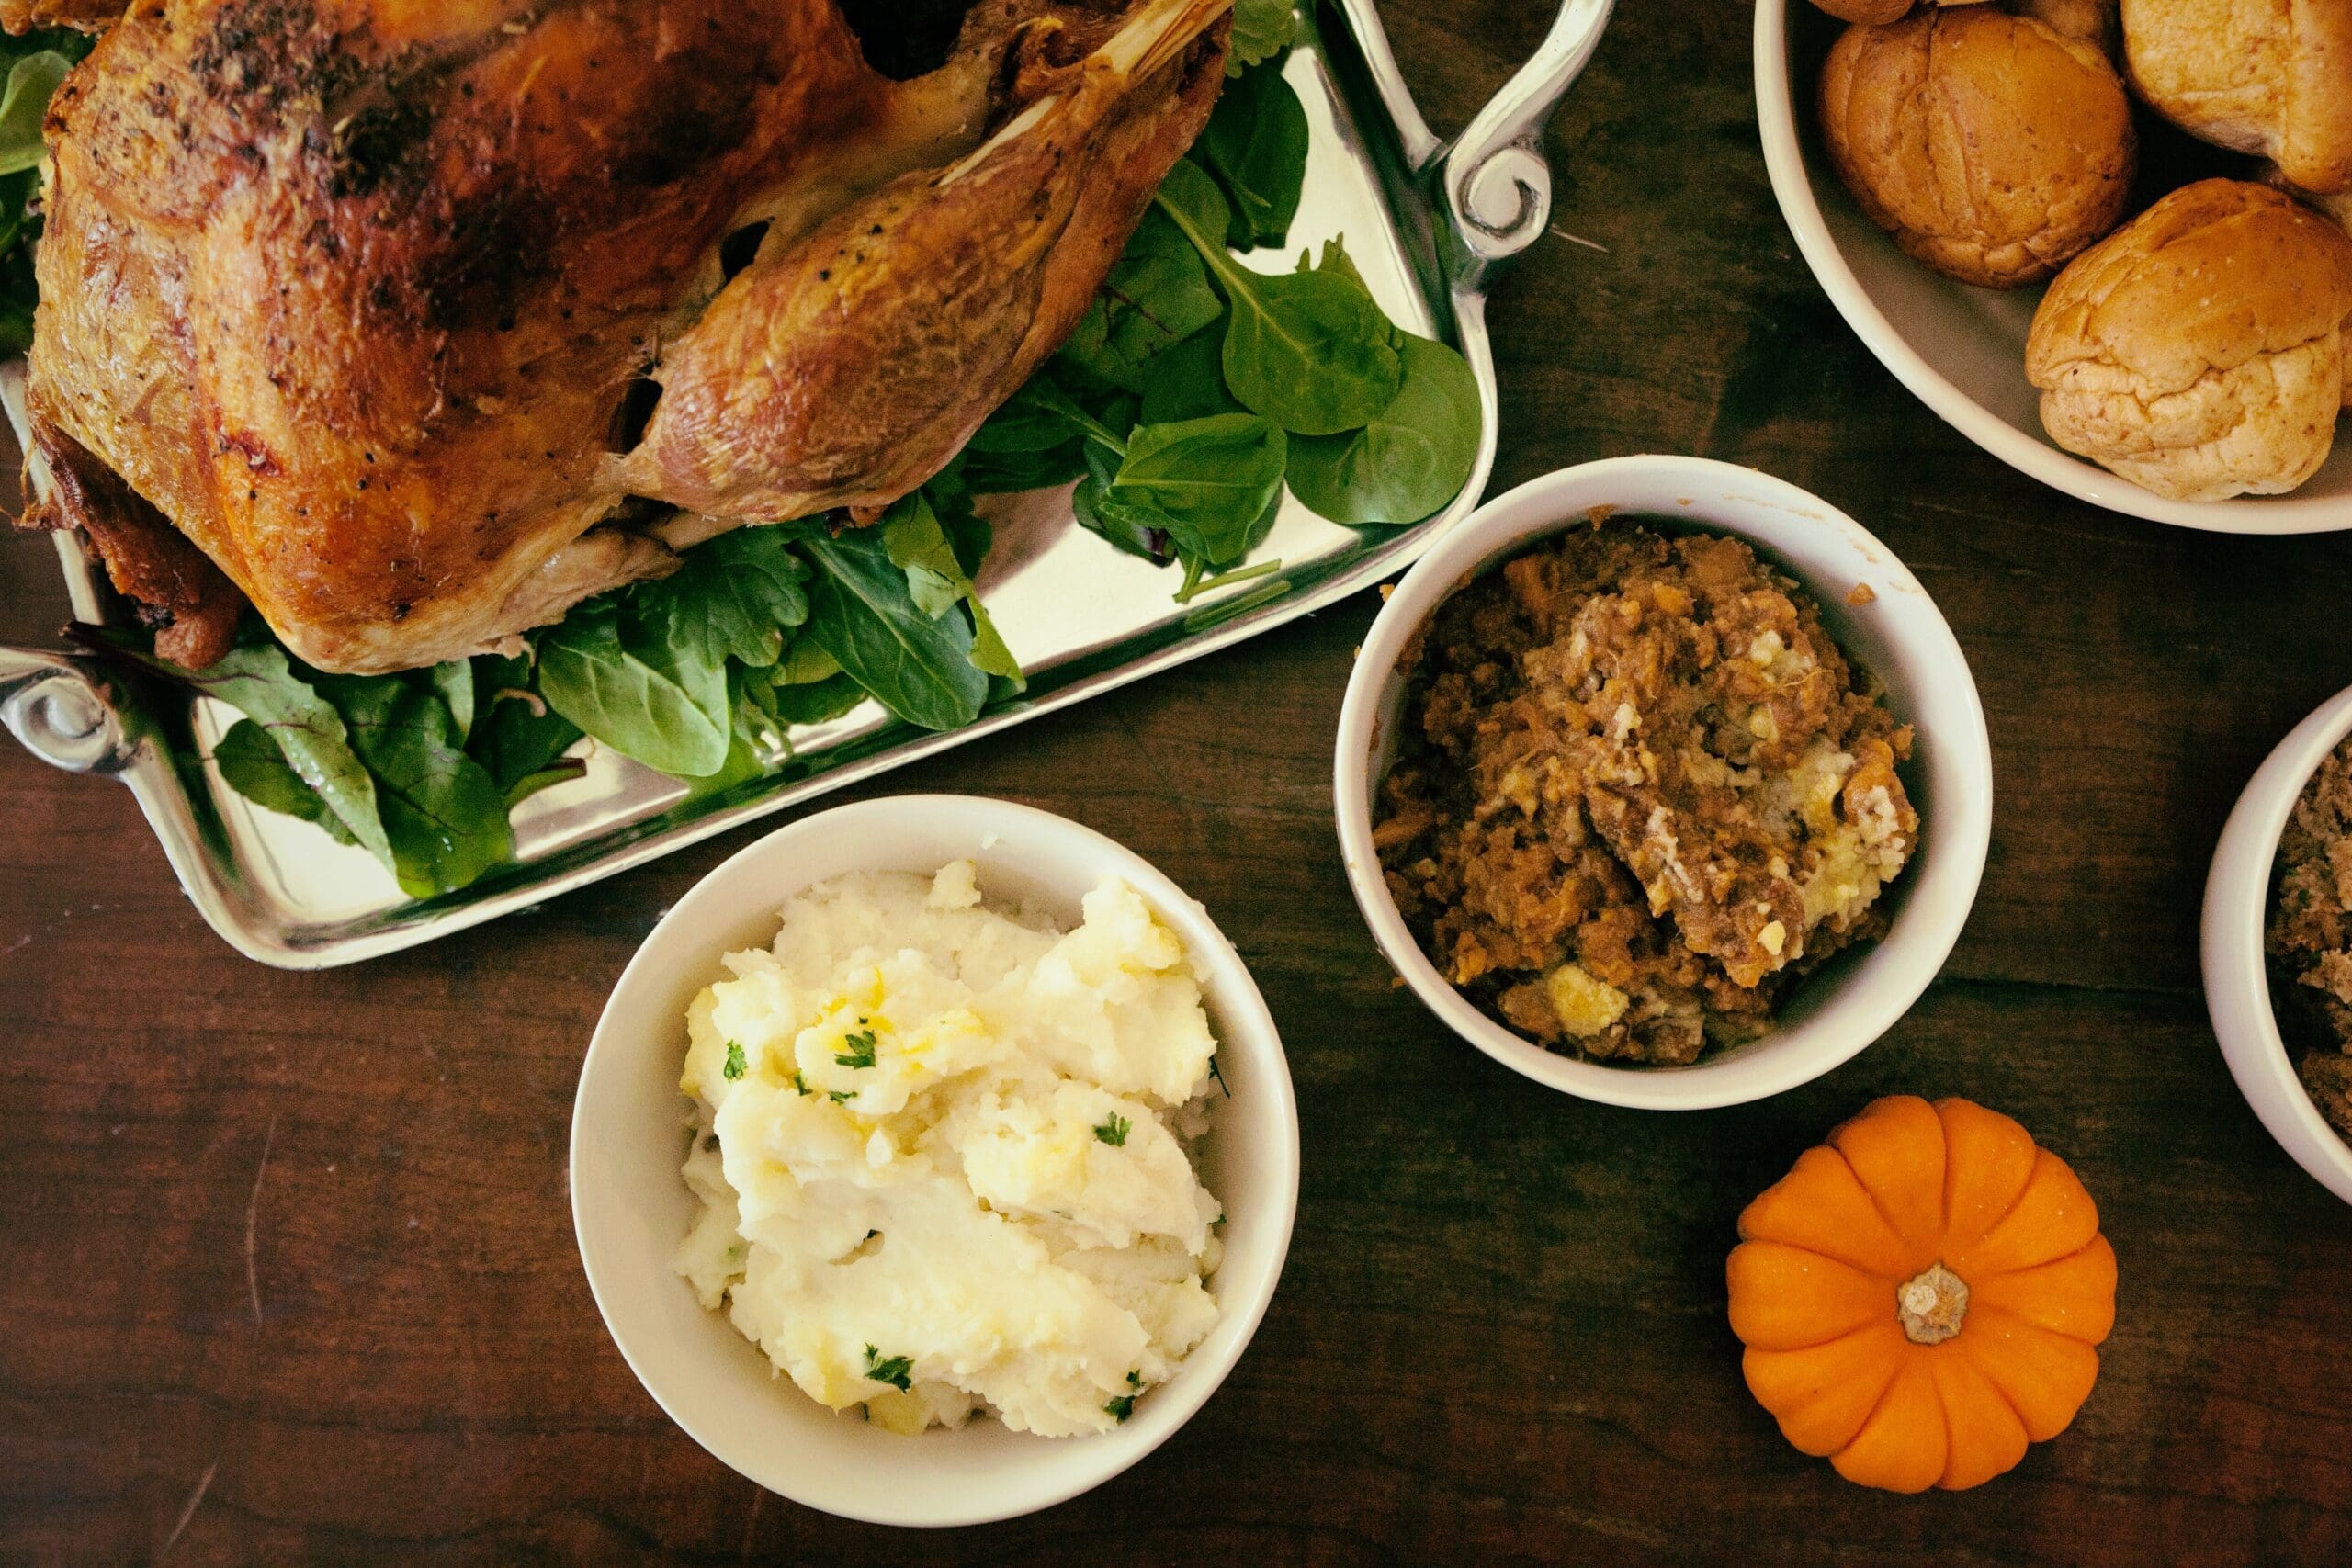 With 15% of Delawareans expected to travel this weekend, here's what to know about Thanksgiving 2022 in Delaware. (Unsplash)